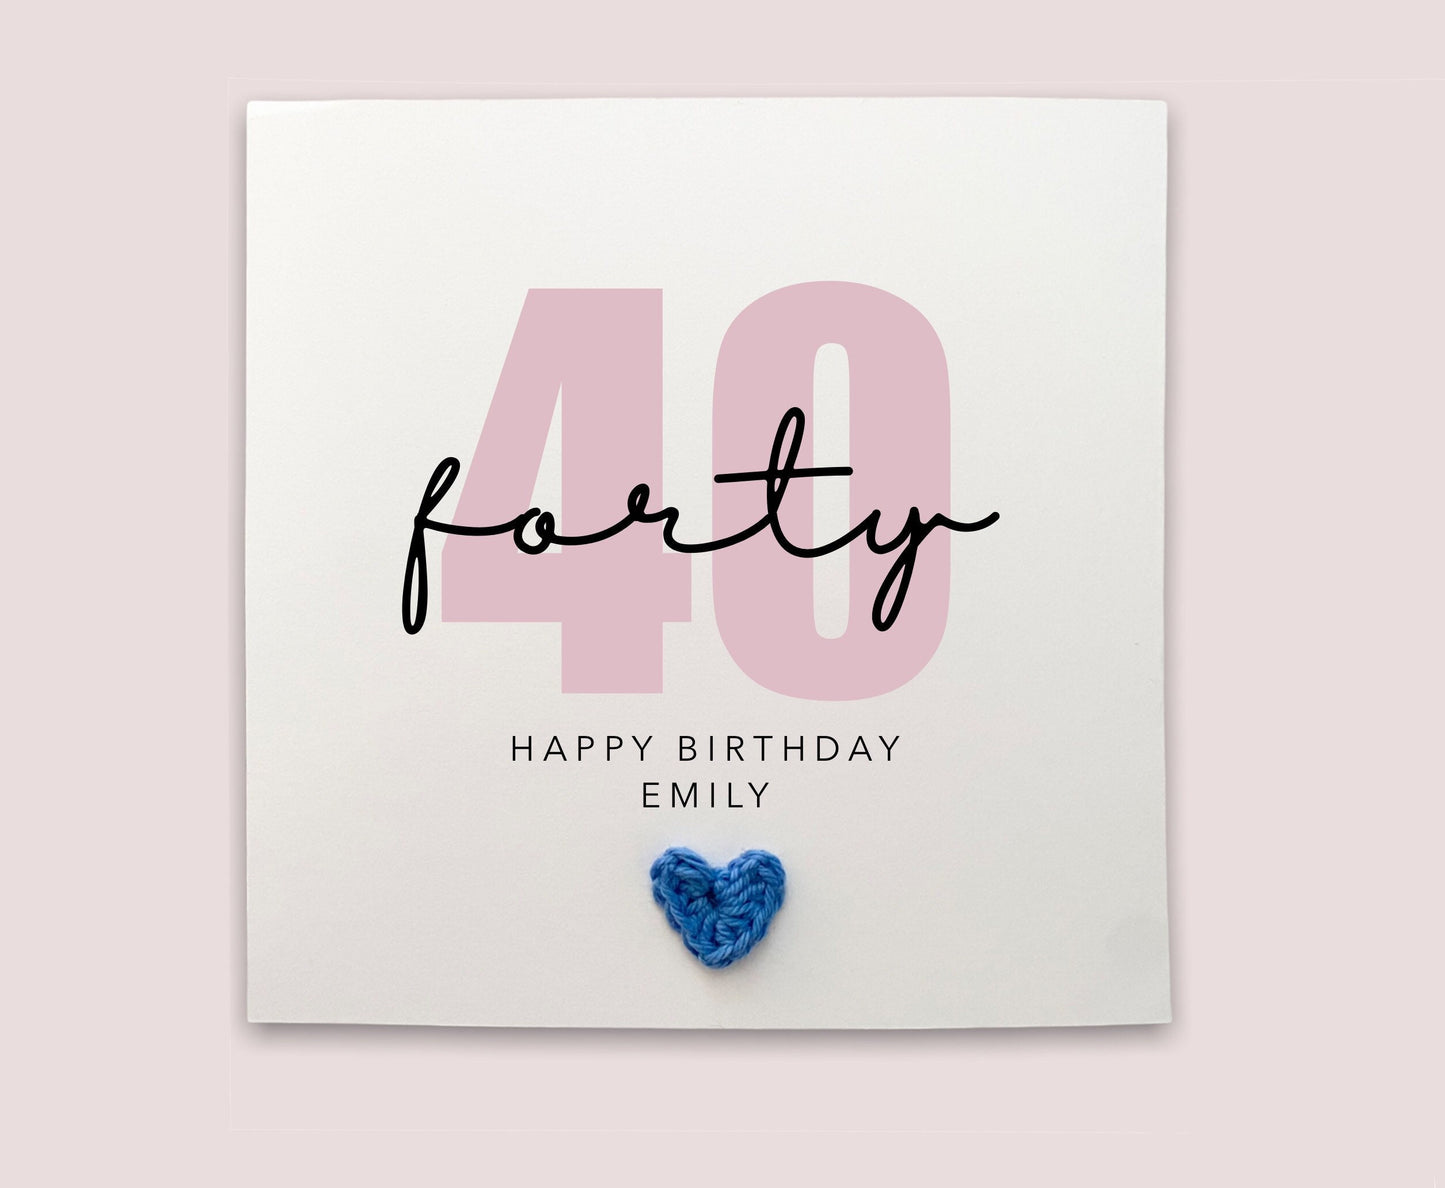 Personalised Happy 40th Birthday, Simple Birthday Card for 40th Birthday, Handmade Card, Birthday Card, Personalised,  Send to recipient, UK